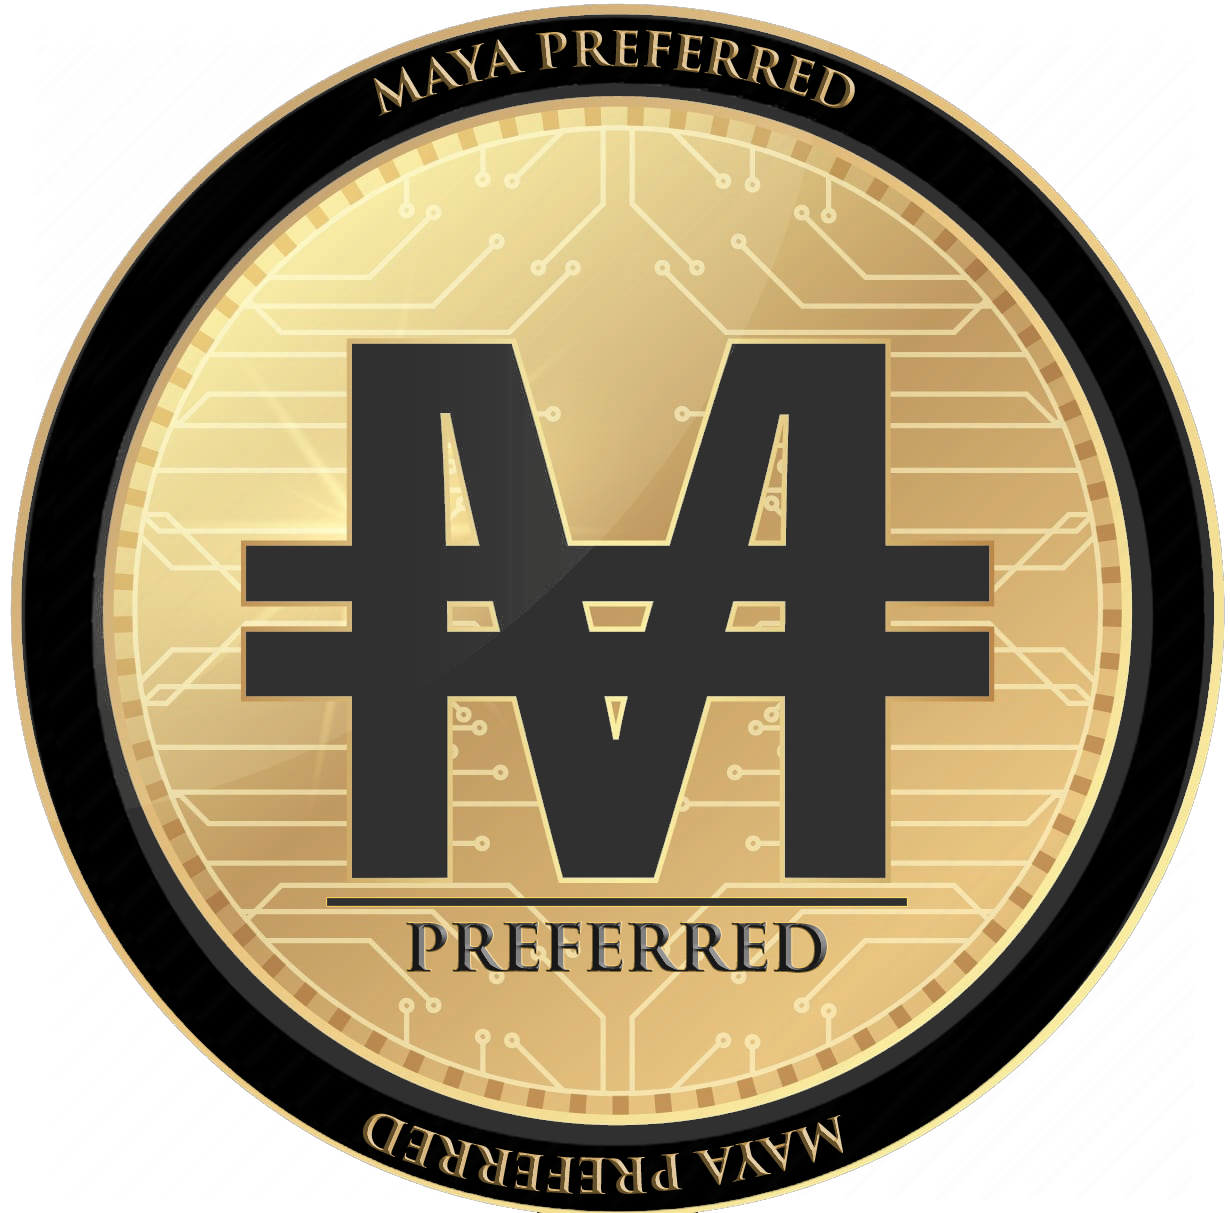 Why buy Maya Preferred 223 (MAPR)? It\'s backing Bitcoin with Gold and Silver, That\'s why.